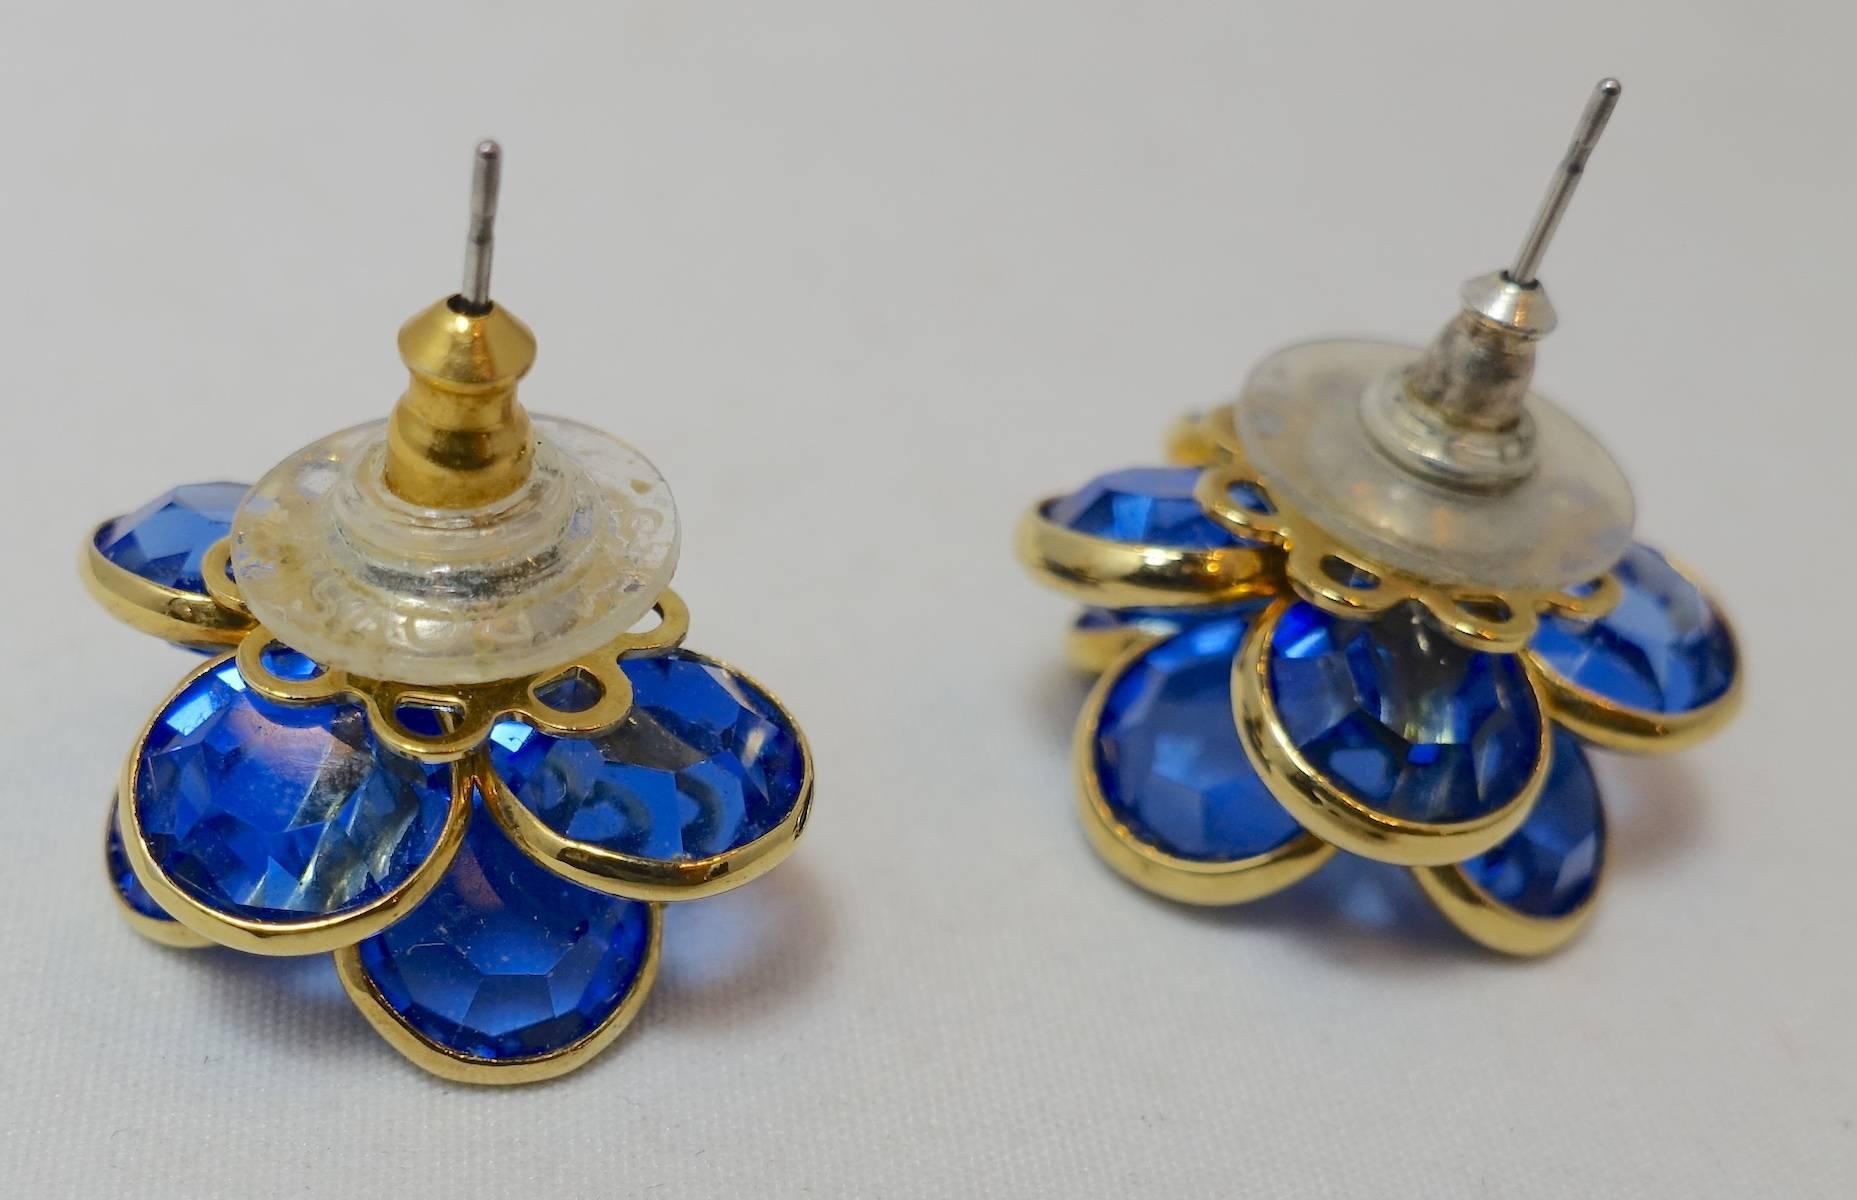 These beautiful vintage earrings feature faceted blue crystals in a floral design.  These pierced earrings measure 3/4” across and are in excellent condition.